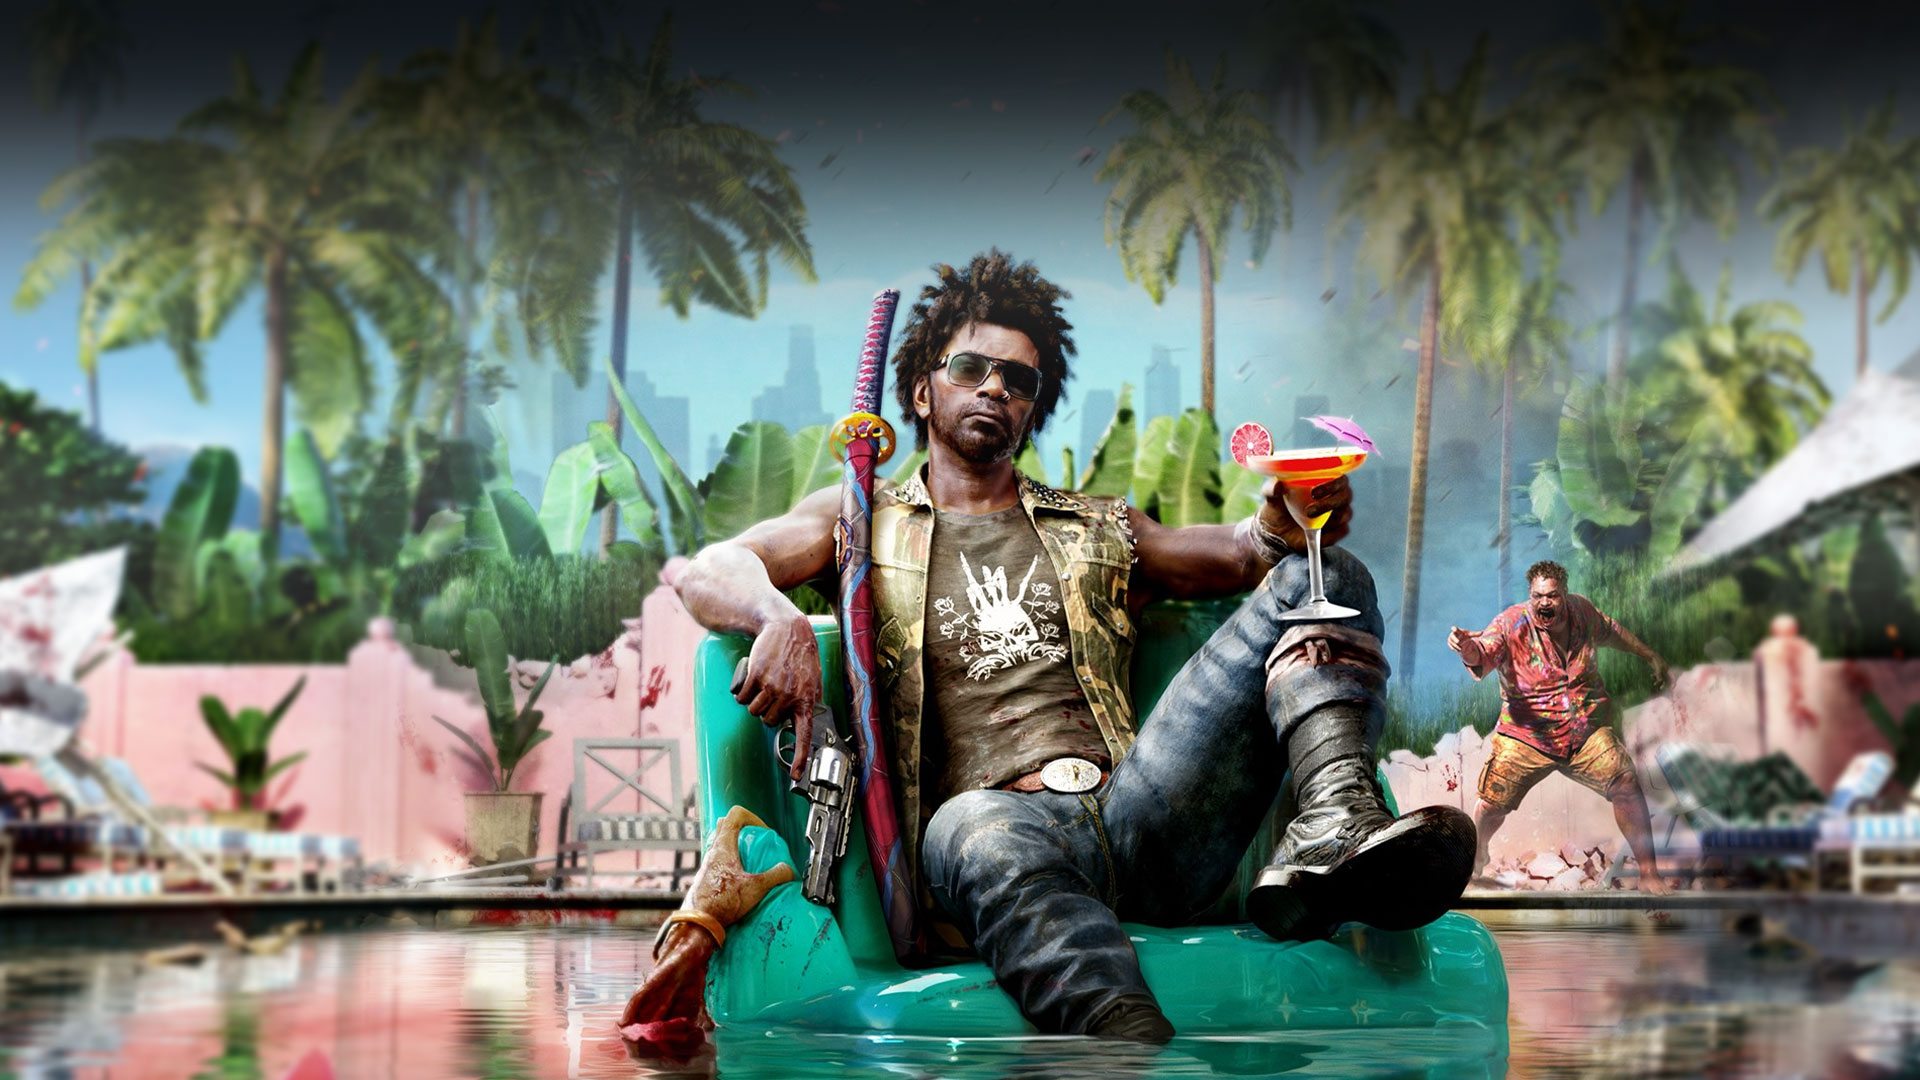 The main character floats on an inflatable pool chair with his weapons and a martini, a zombie behind him points as a hand reaches out from the pool to grab the chair.